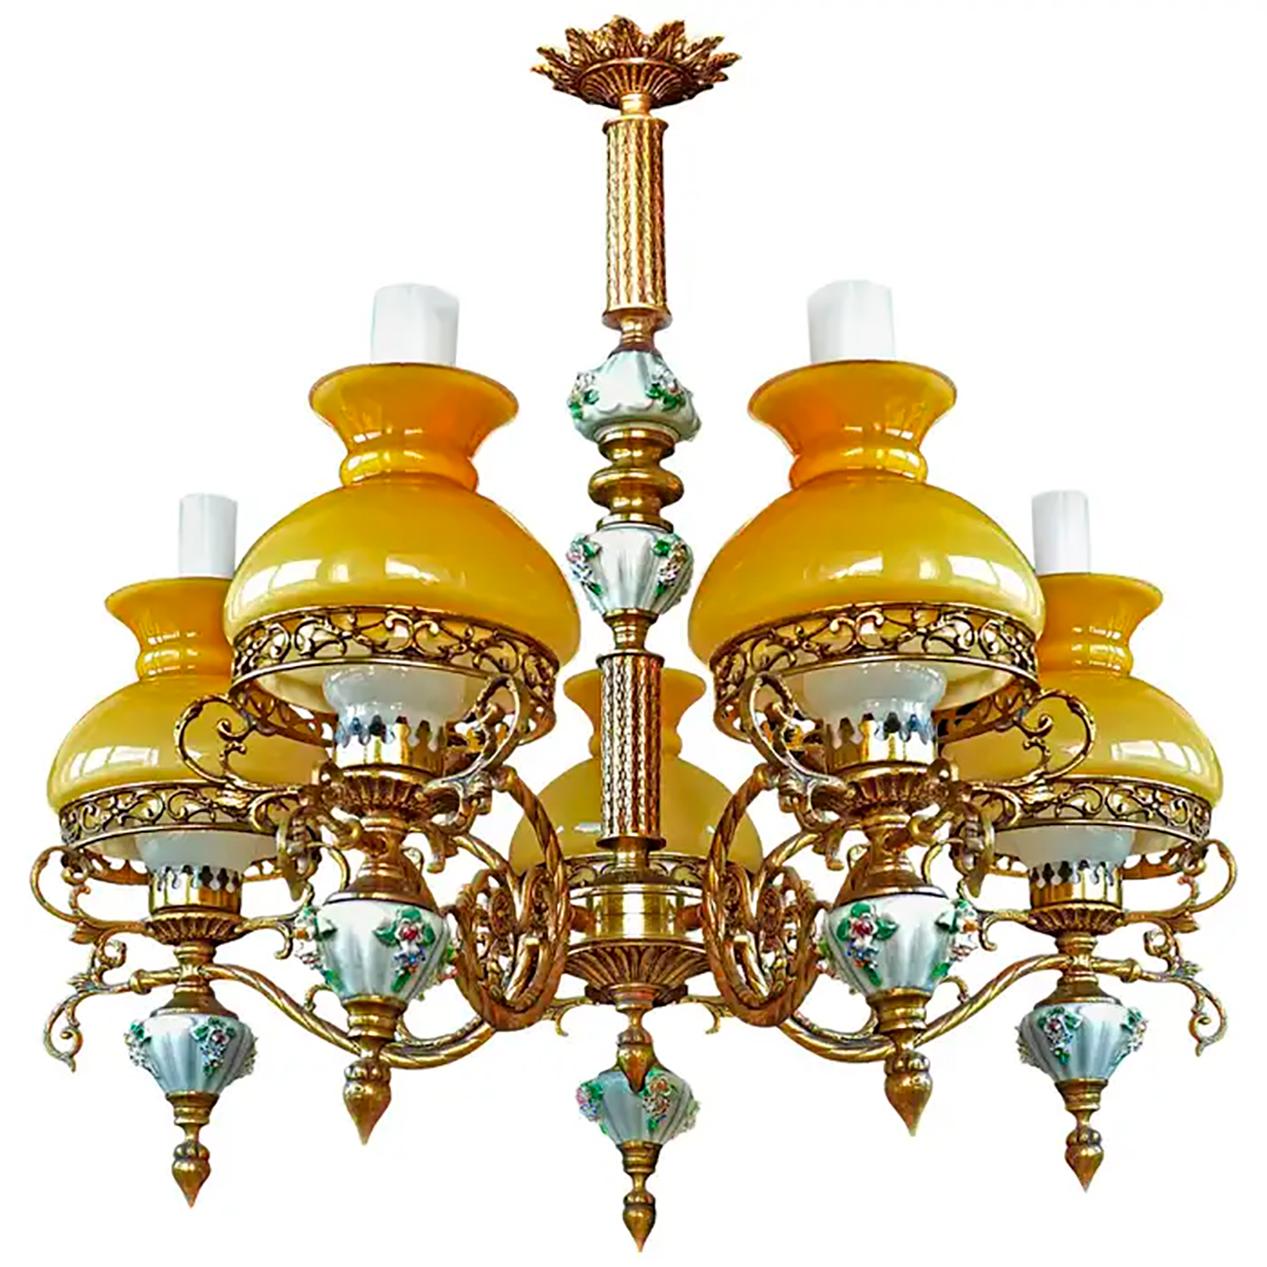 Early Victorian Chandeliers and Pendants